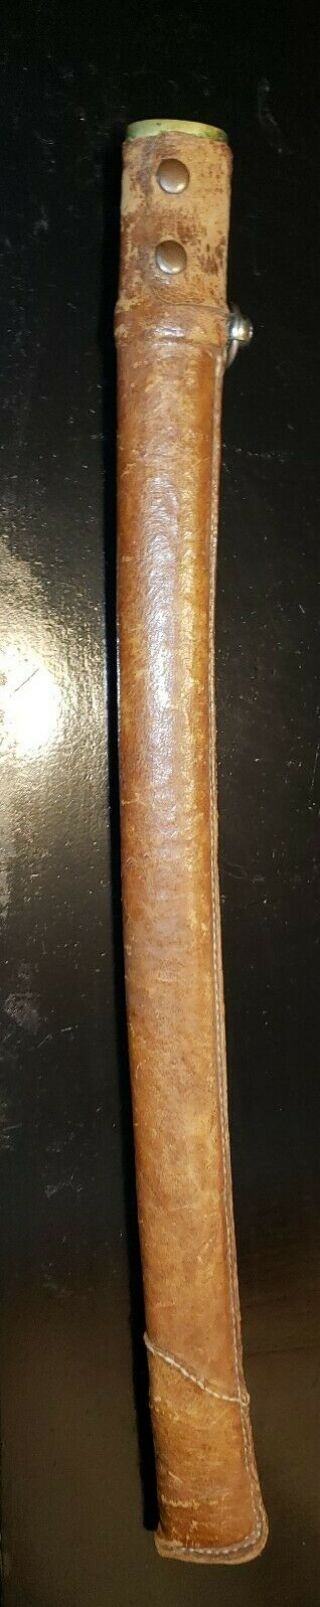 Ww2 Japanese Sword Shin Gunto Wood With Leather Scabbard Parts Collectible Part